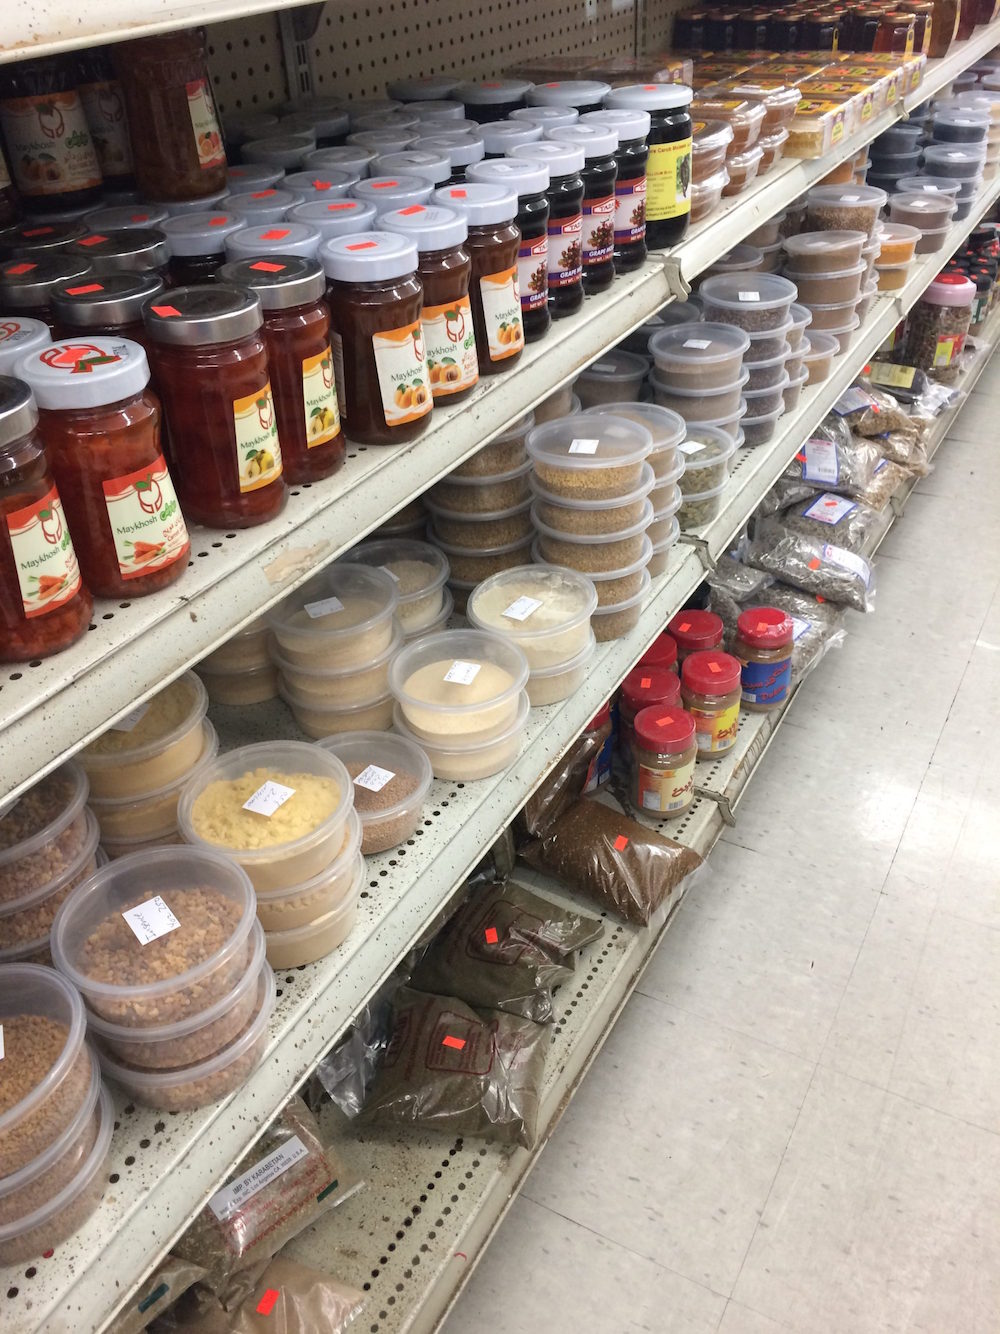 Spices!!! If there is a specific Middle Eastern spice you're looking for, I'm sure Fresno Deli has it.